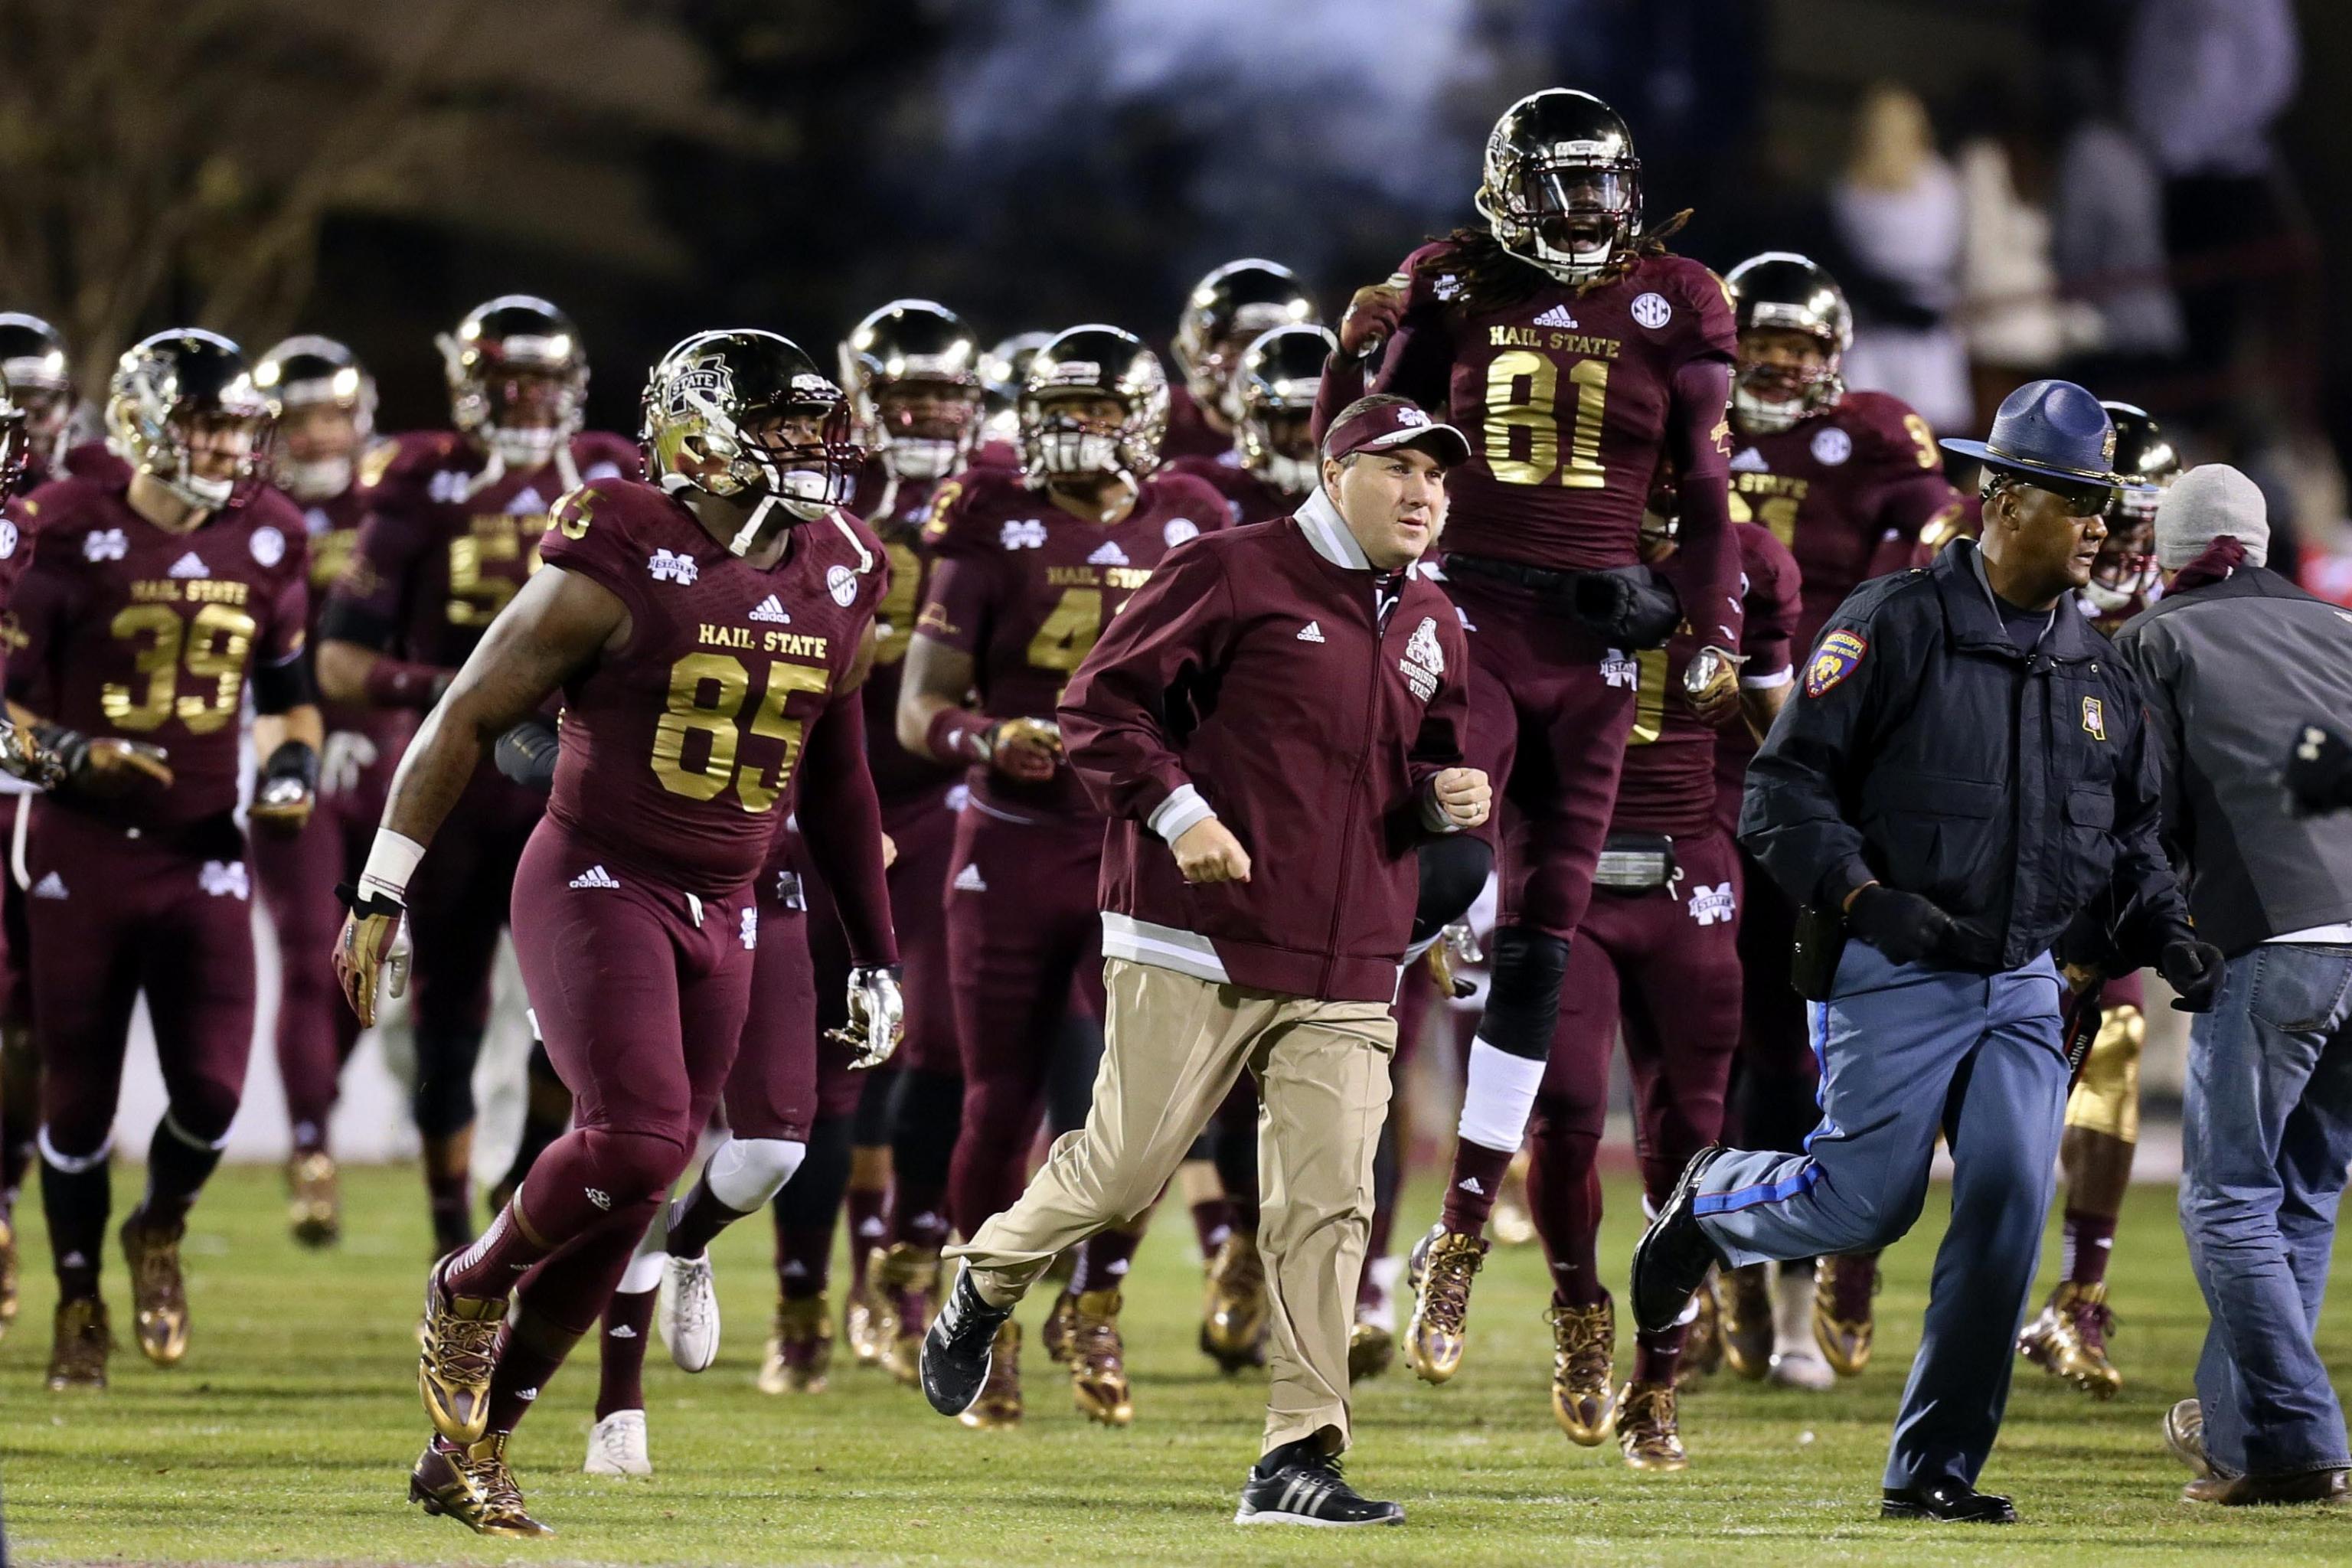 Egg Bowl set for Thanksgiving night - The Dispatch